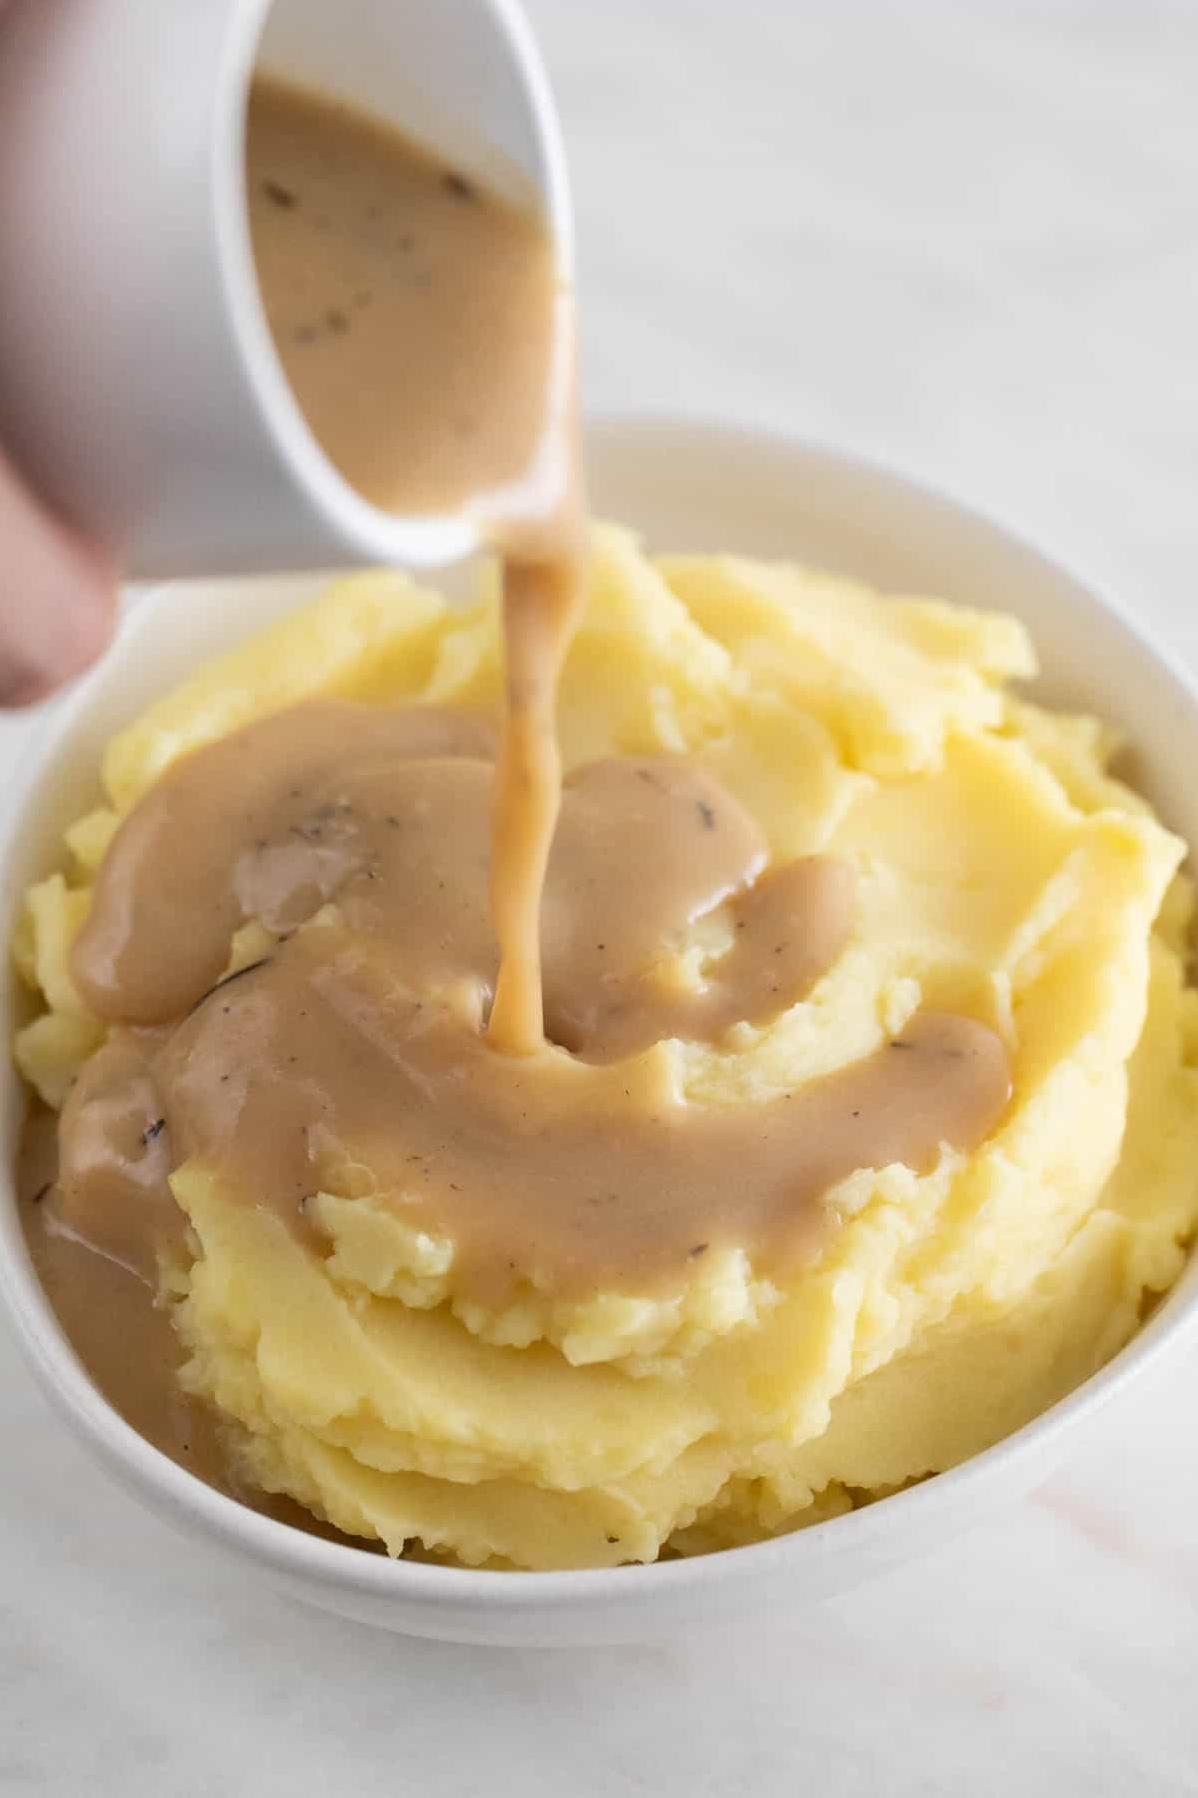  Say goodbye to dairy with this vegan cheese sauce recipe.